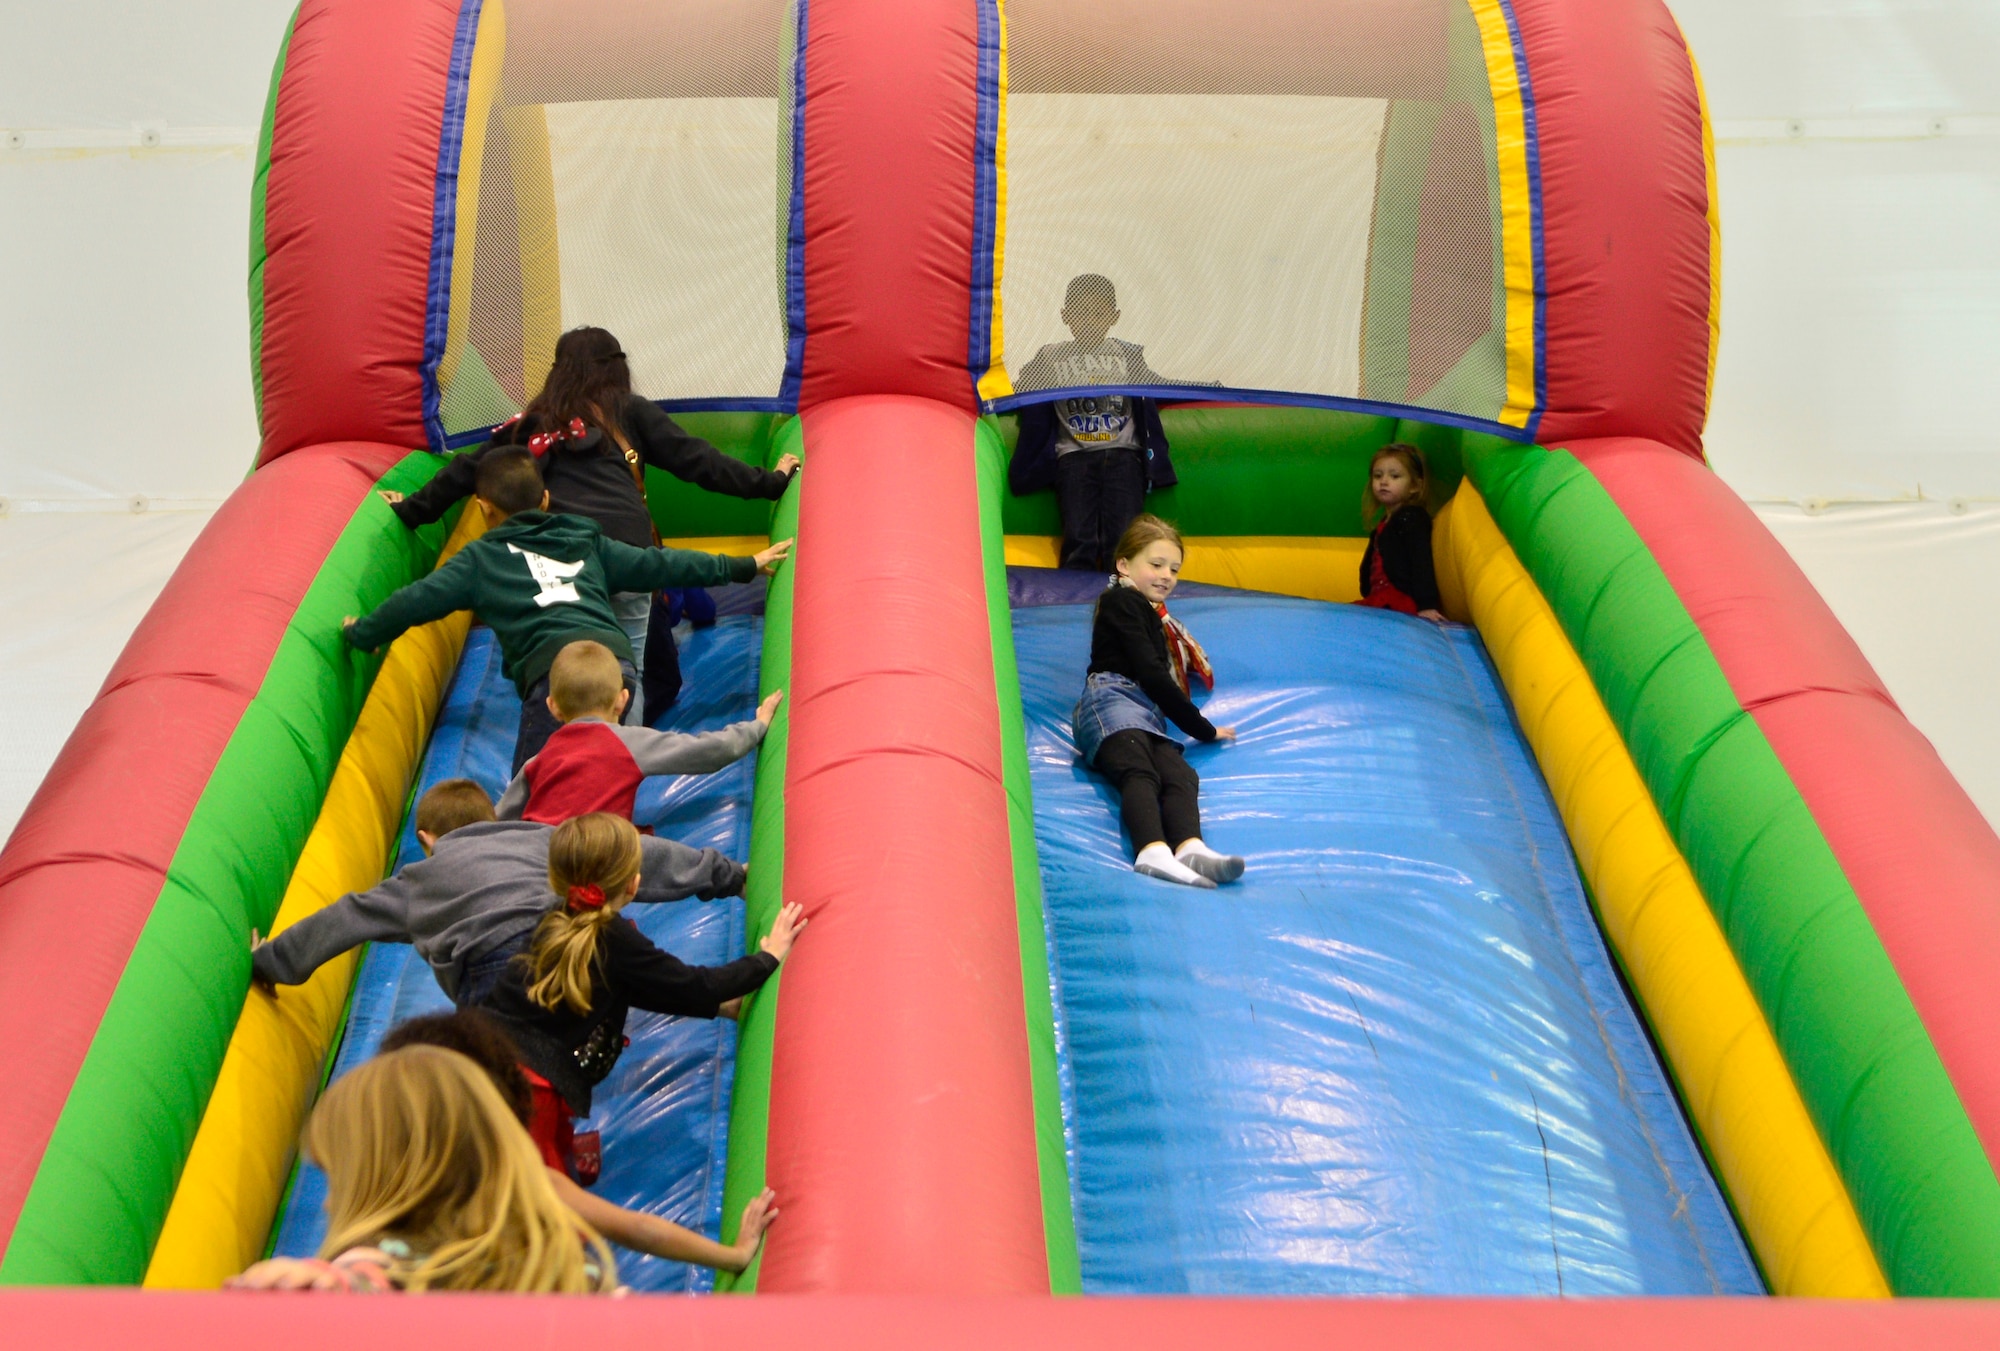 Fun HQ - Party Hire for Kids - ActiveActivities